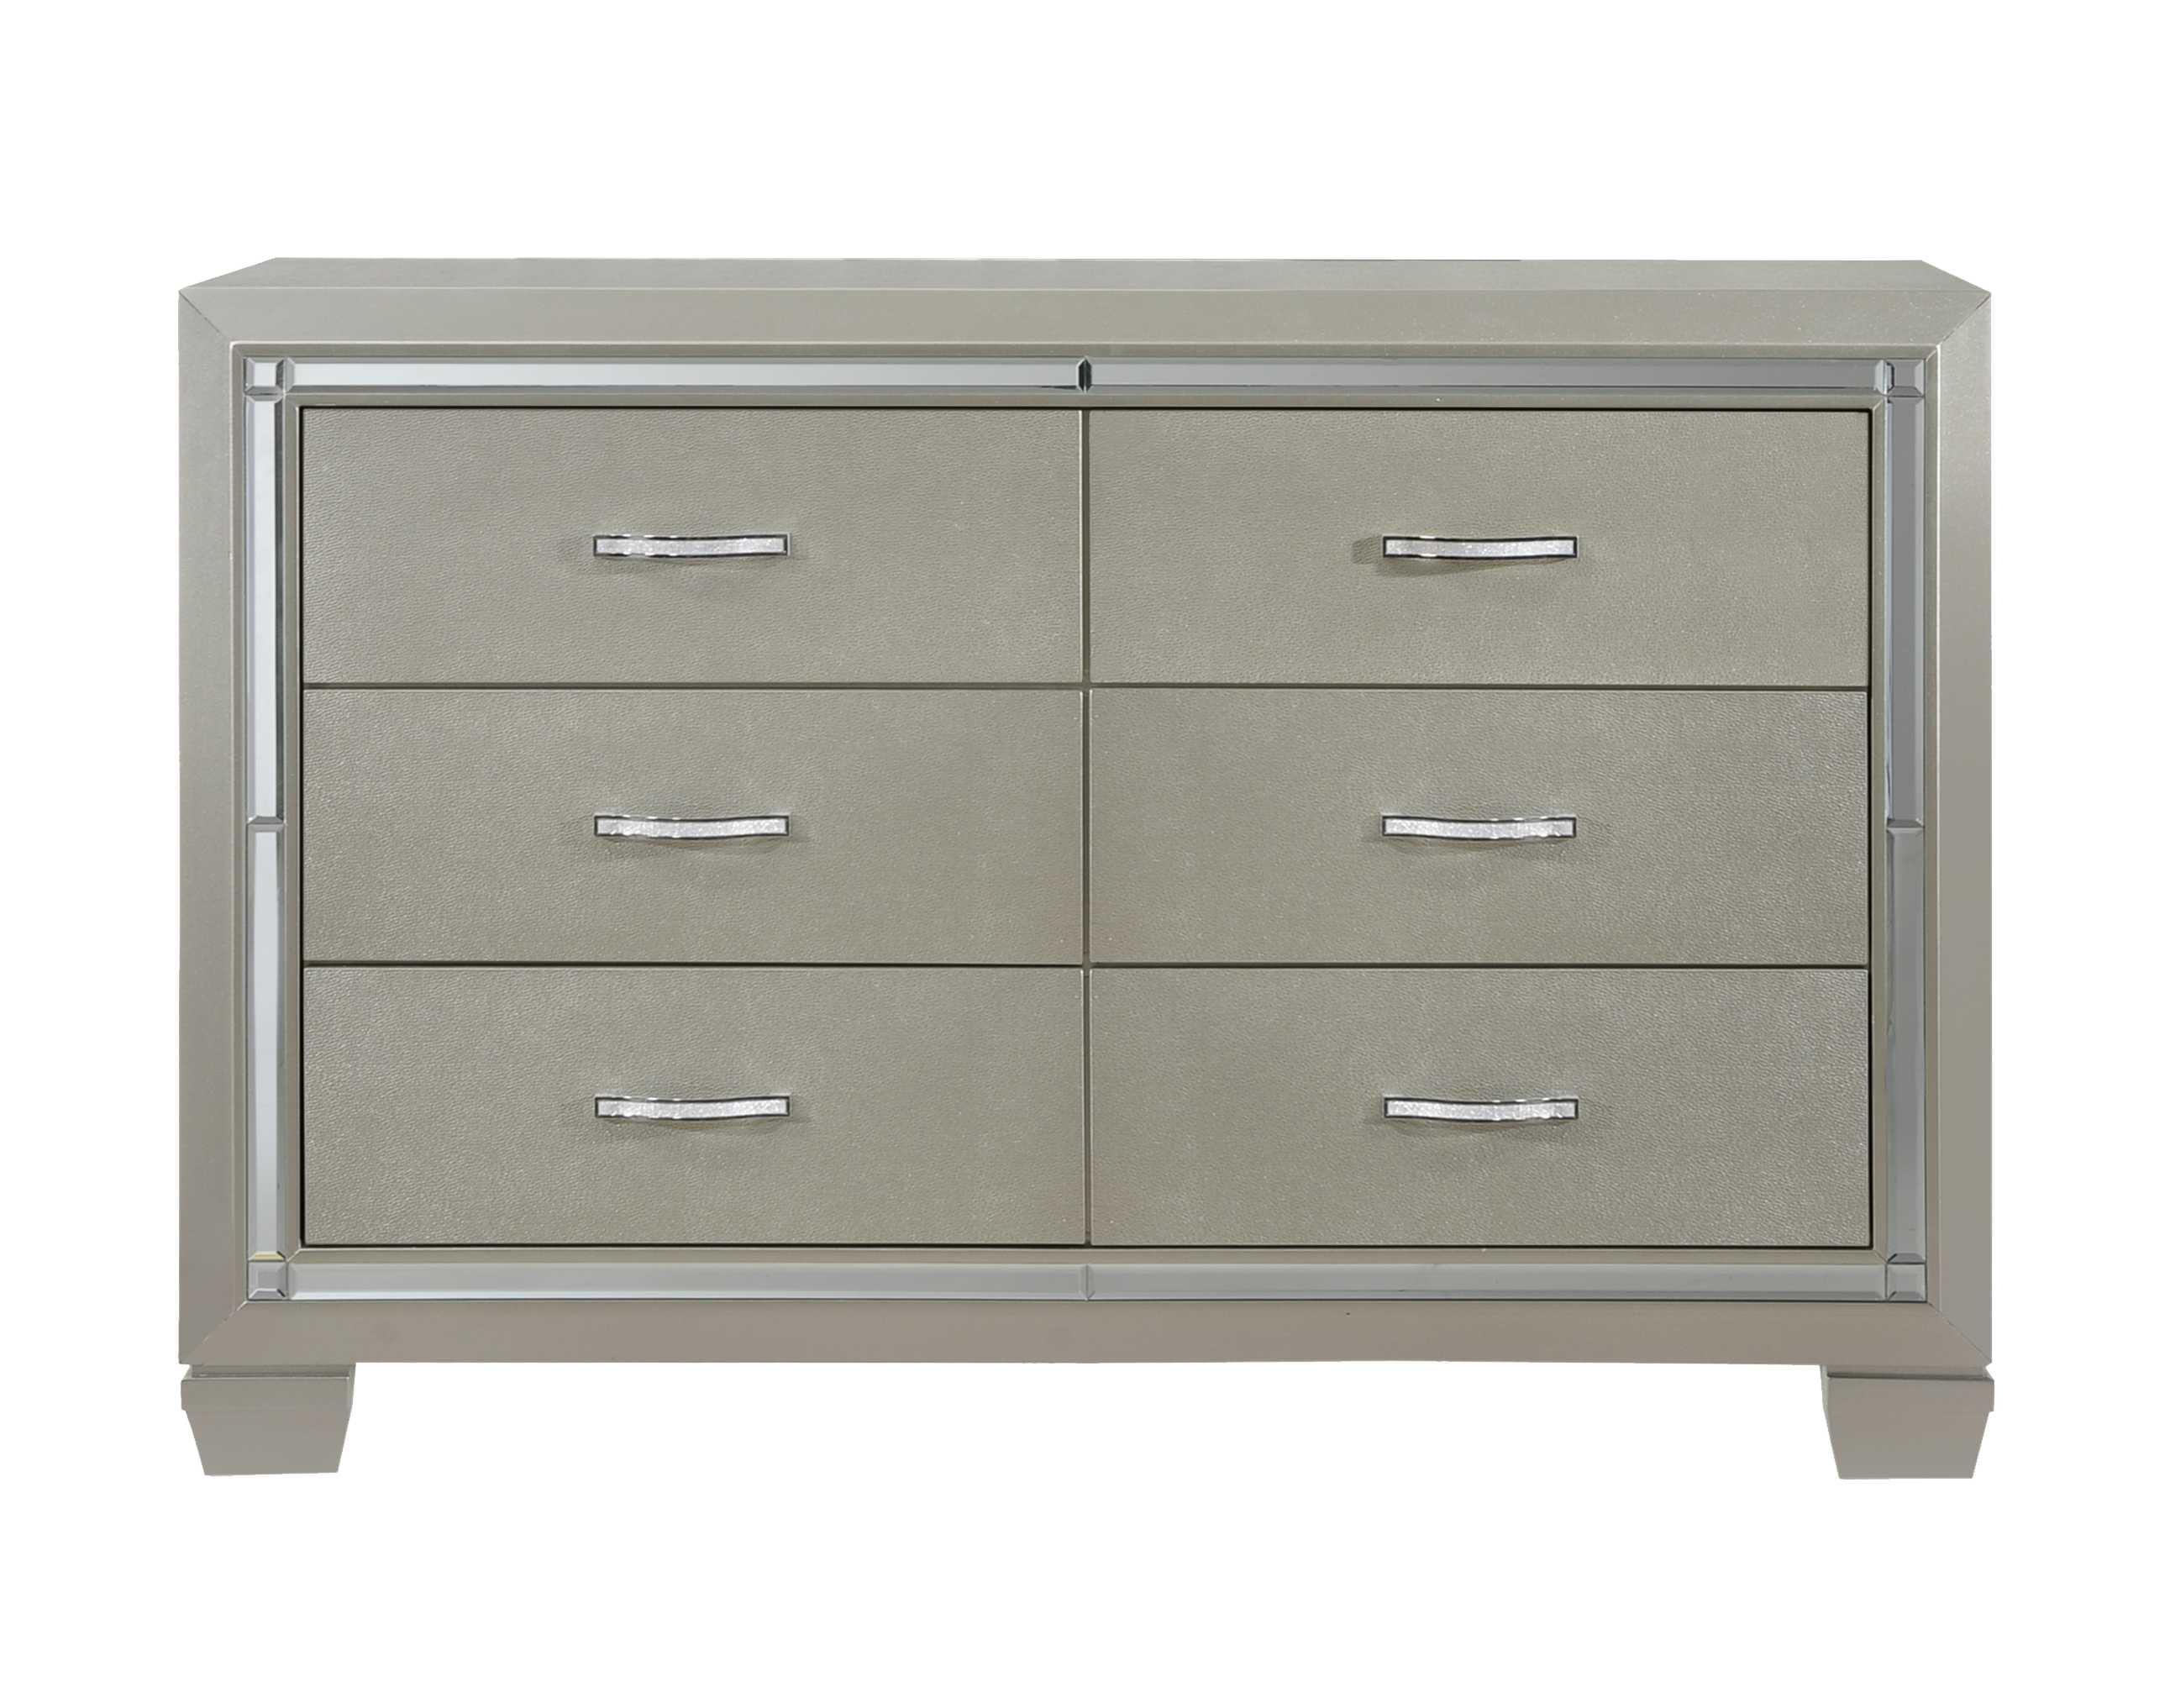 Glamorous Gray 7-Drawer Dresser with Chrome Handles and Mirror Accents